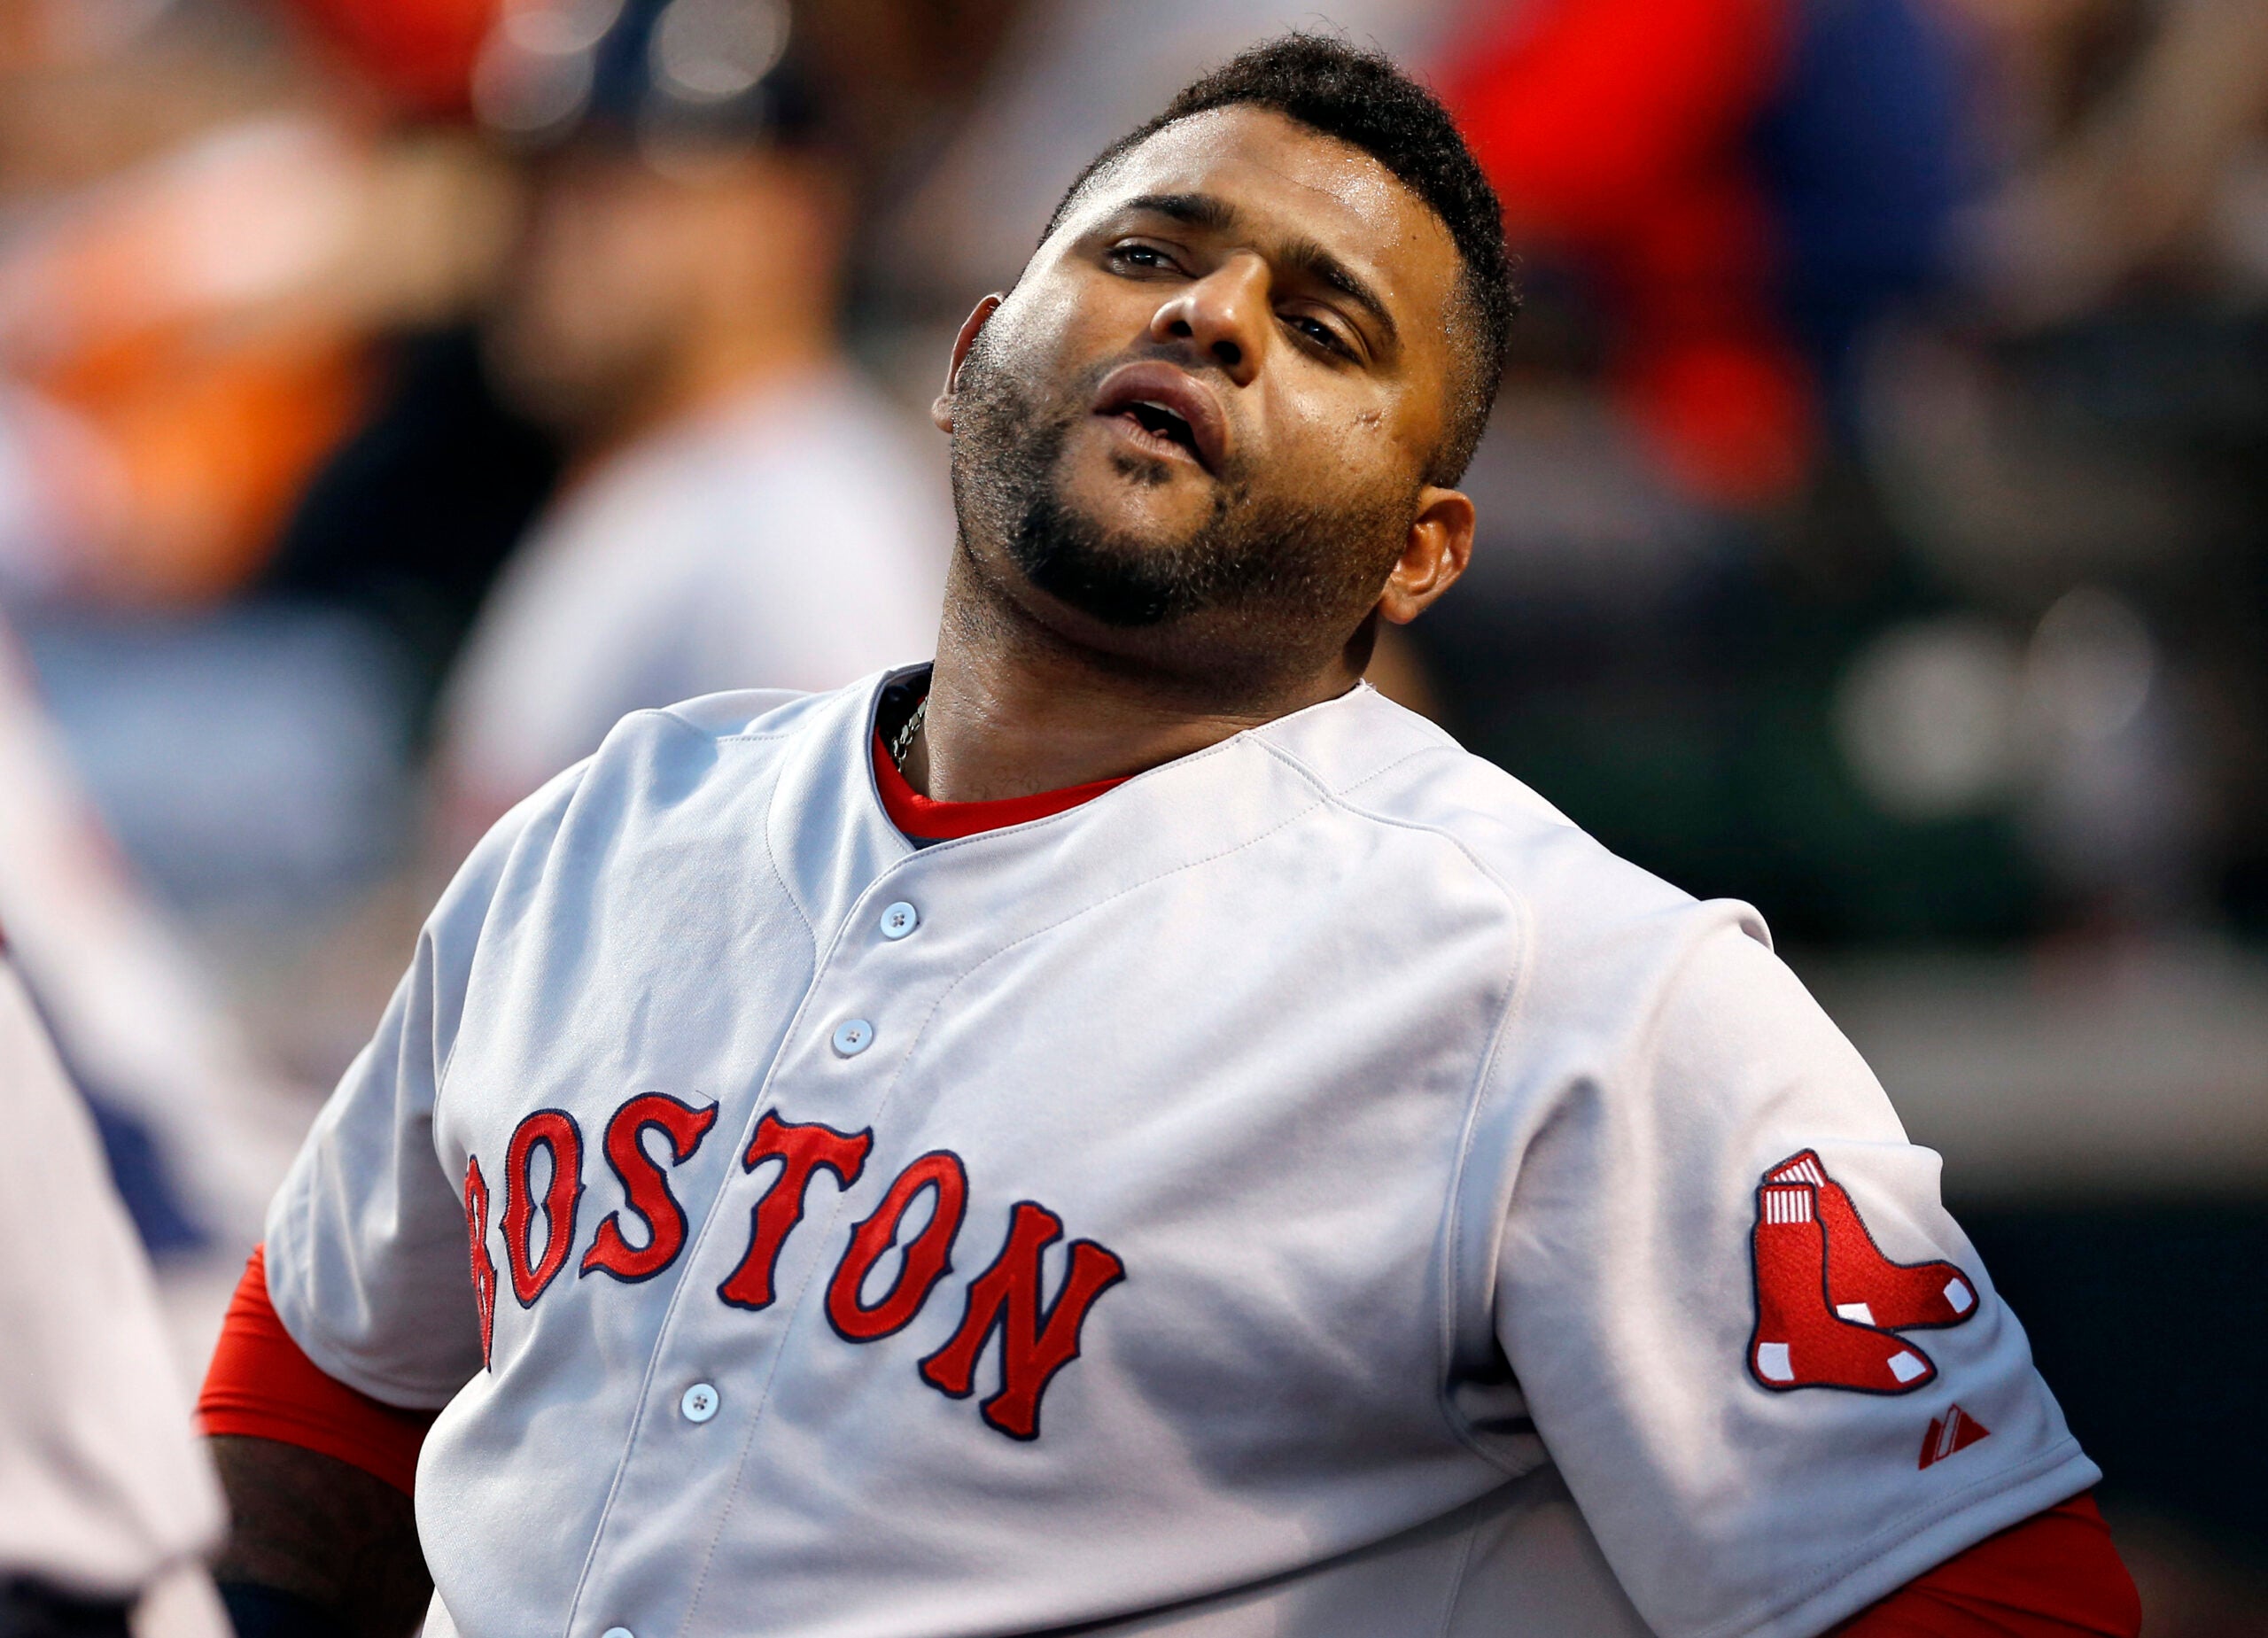 AP source: Pablo Sandoval to sign minor league deal with Giants